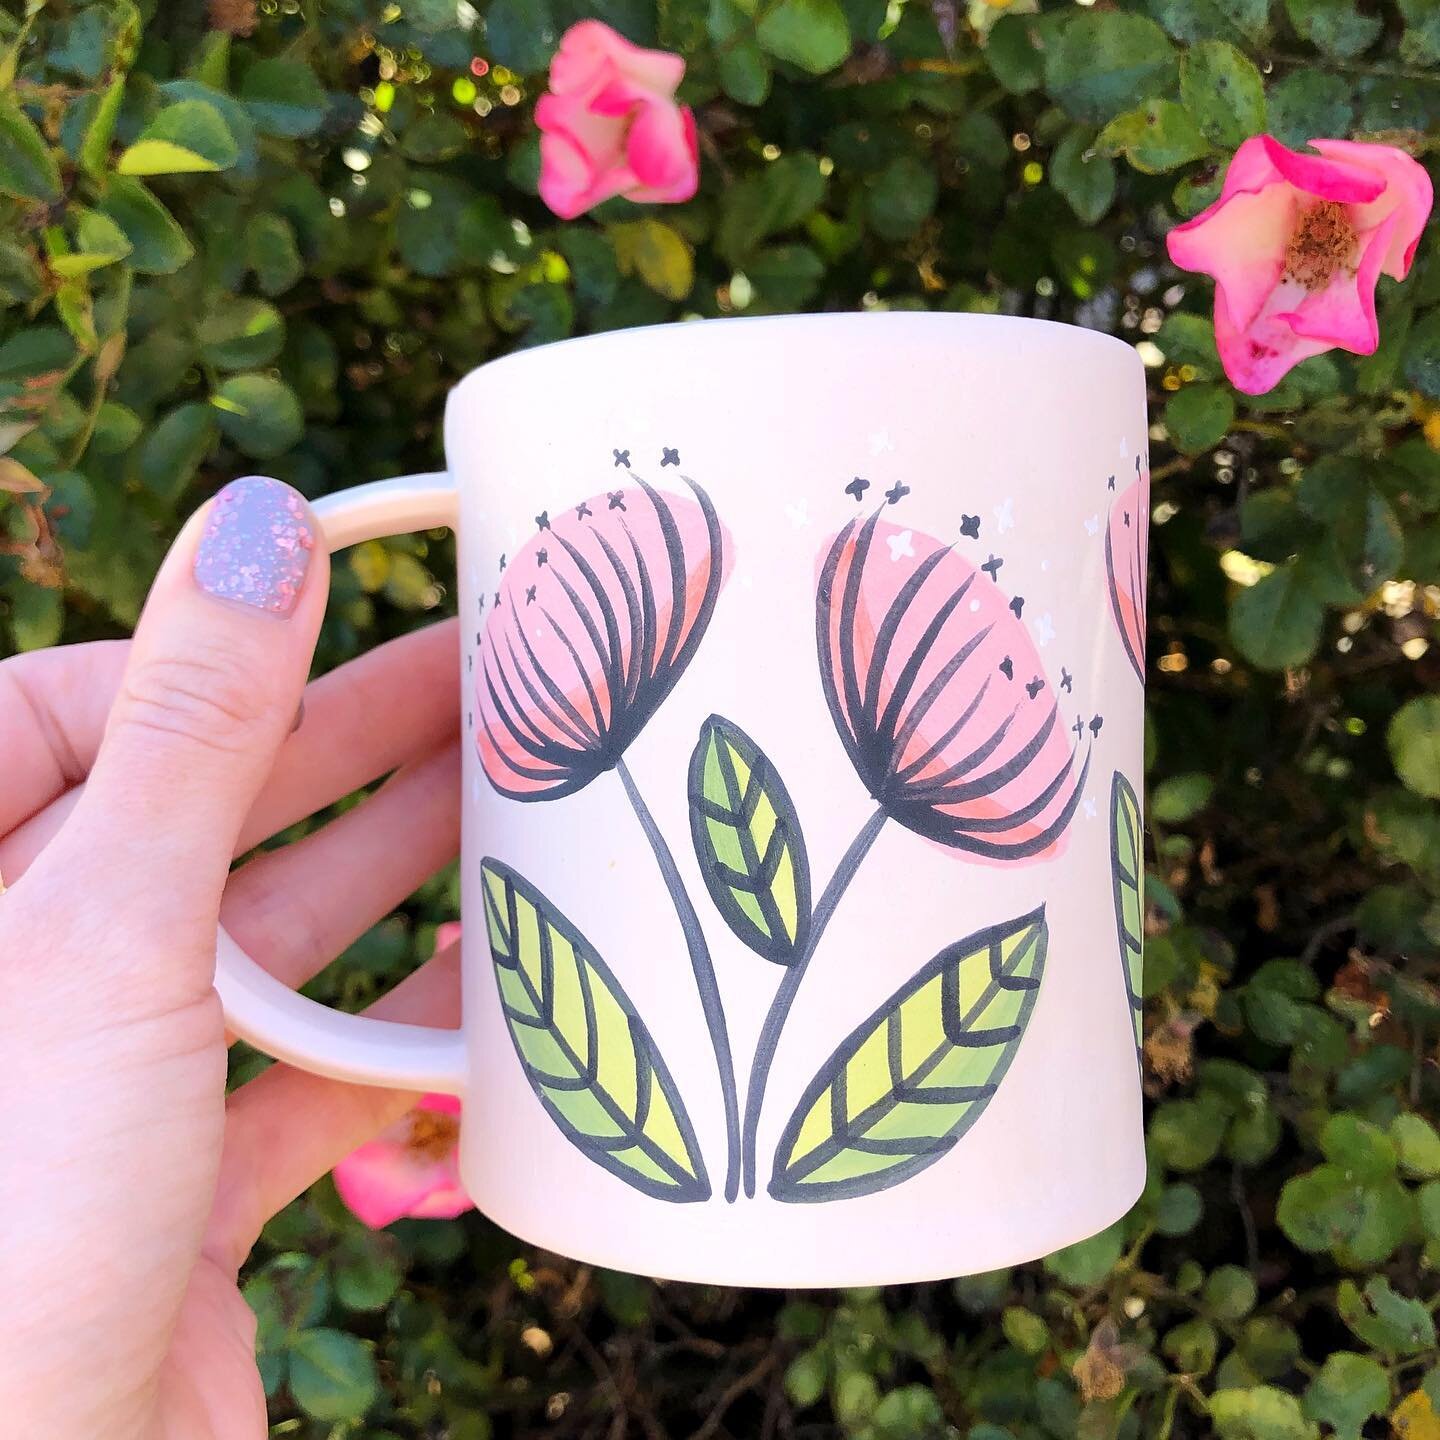 🌸 New fiorella mug, bisqued and ready for glaze! I have a new batch of work coming out of the kiln soon 😍 I&rsquo;m thinking about having a mini website update in the next 2 weeks or so. Stay tuned for date announcement! 📅 #cs_ceramics #handmadpot